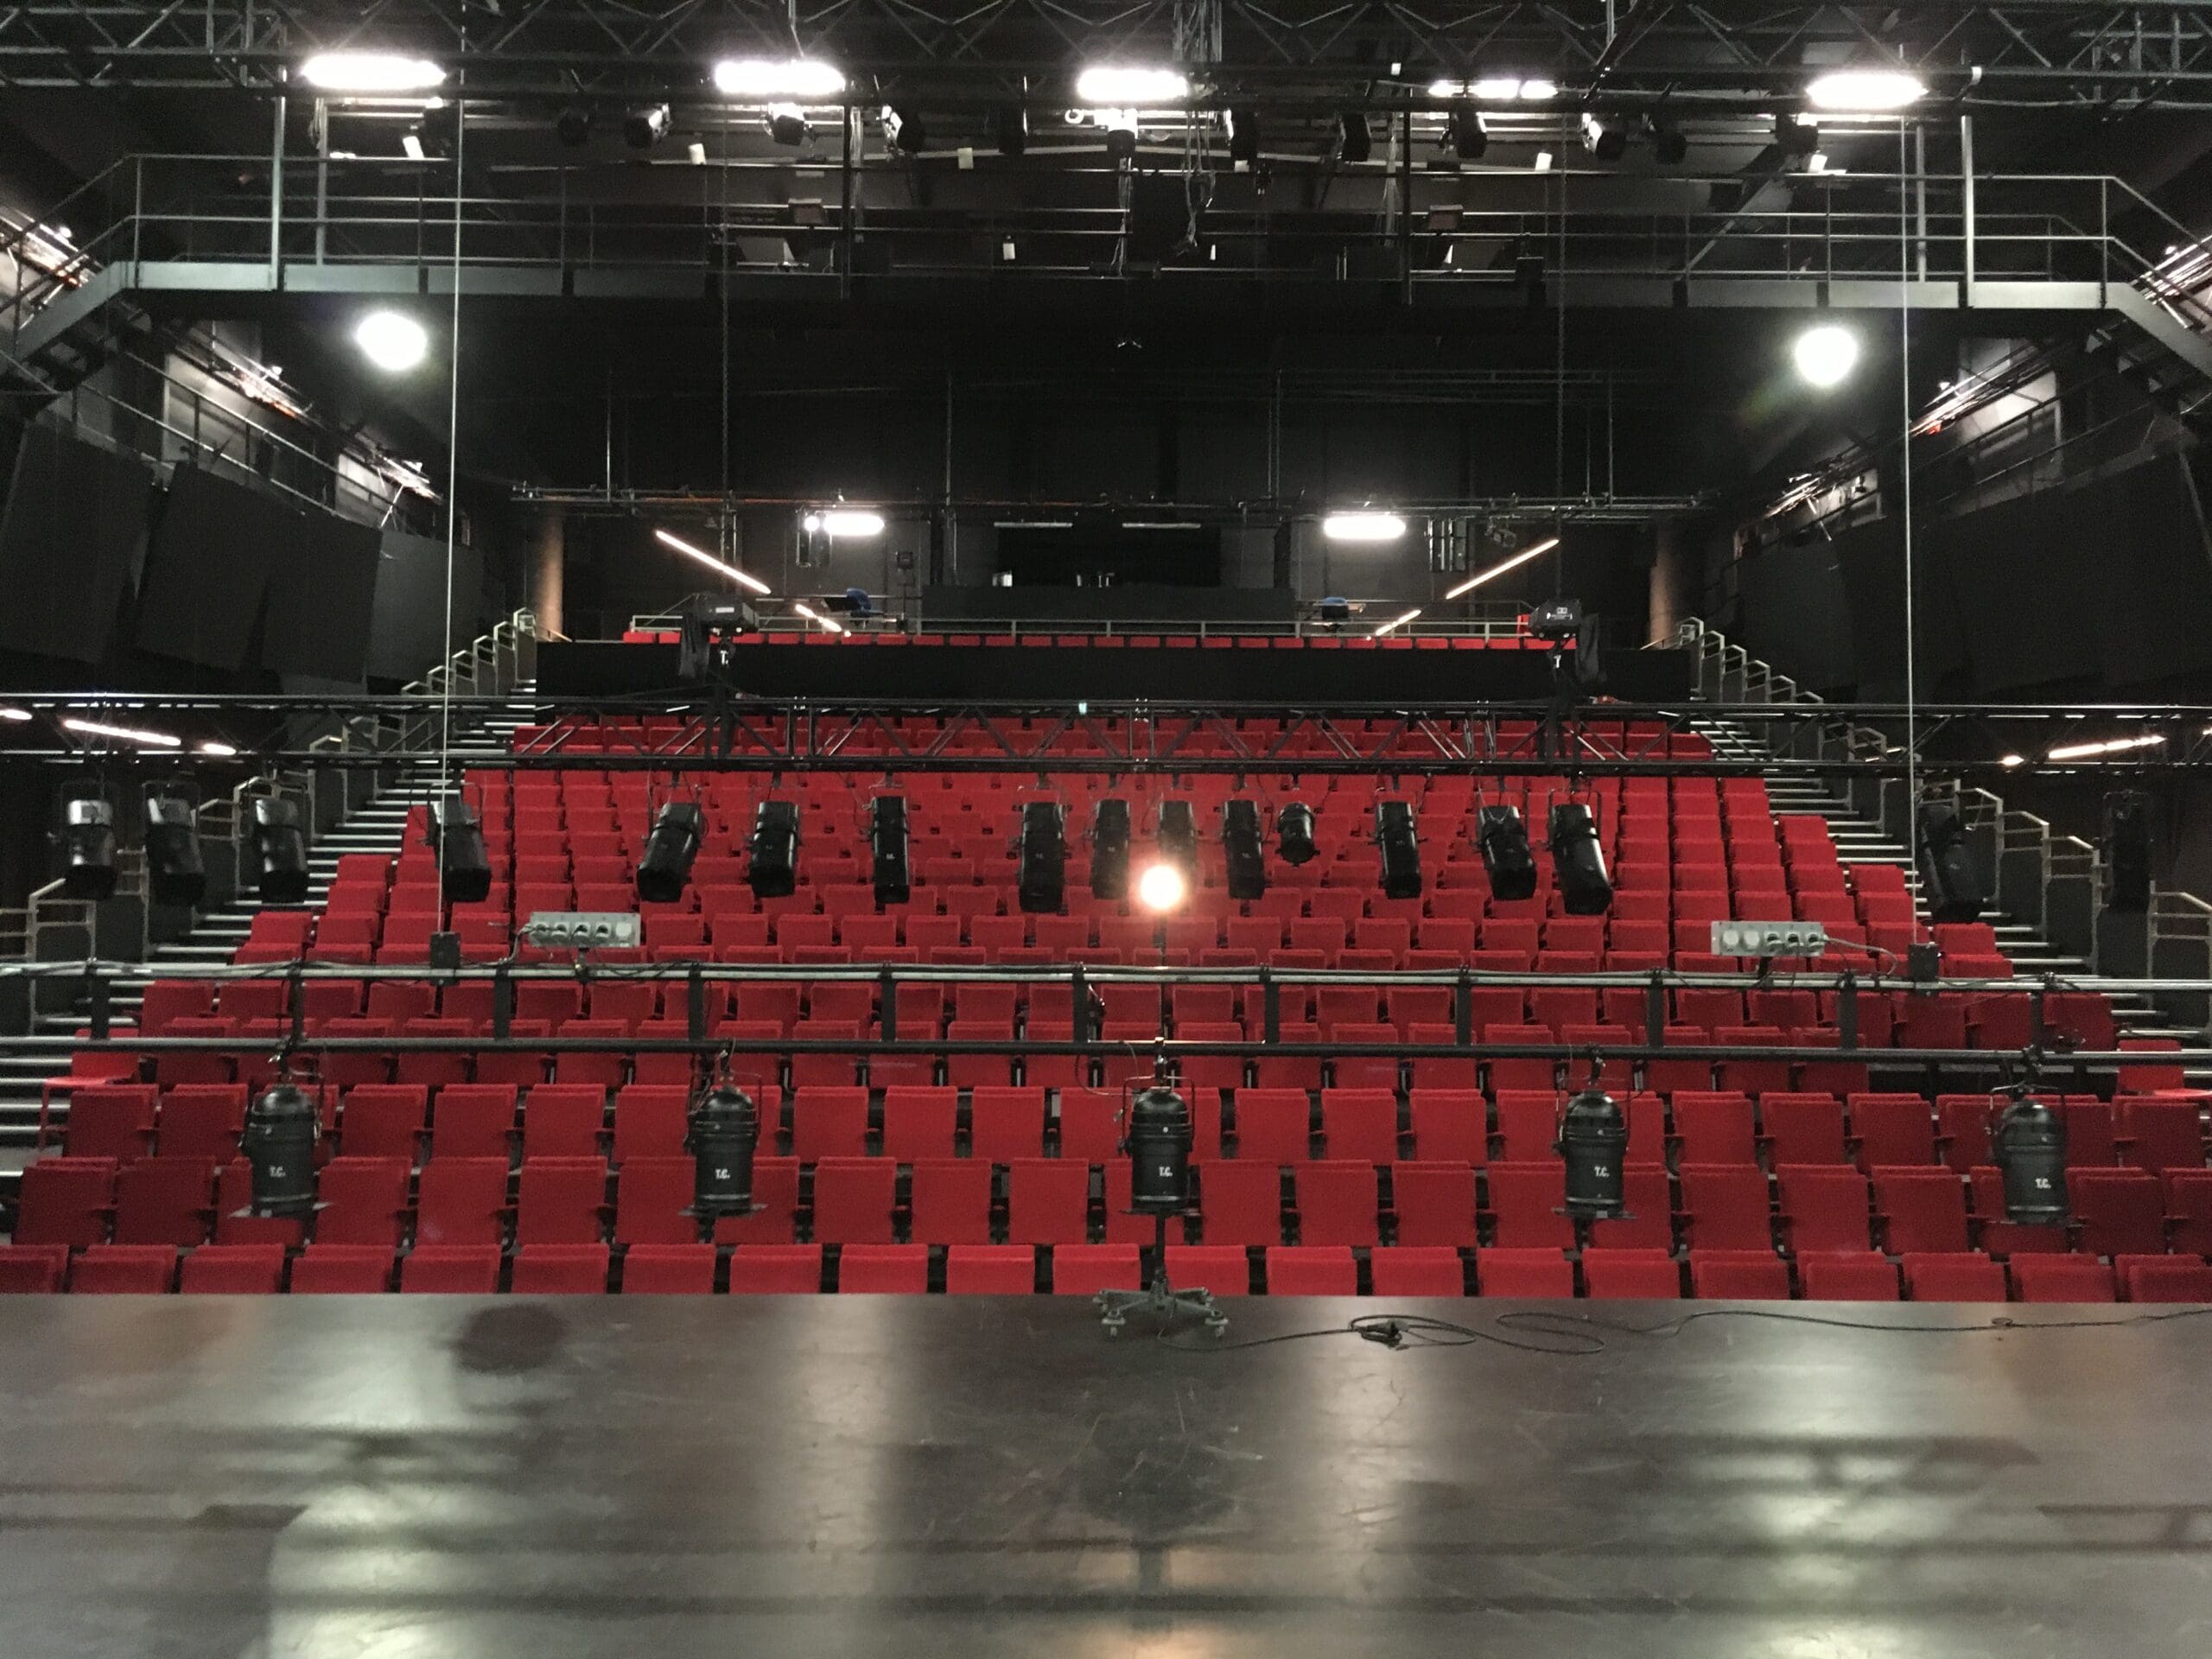 City of Nice – Temporary Theatre During Renovations